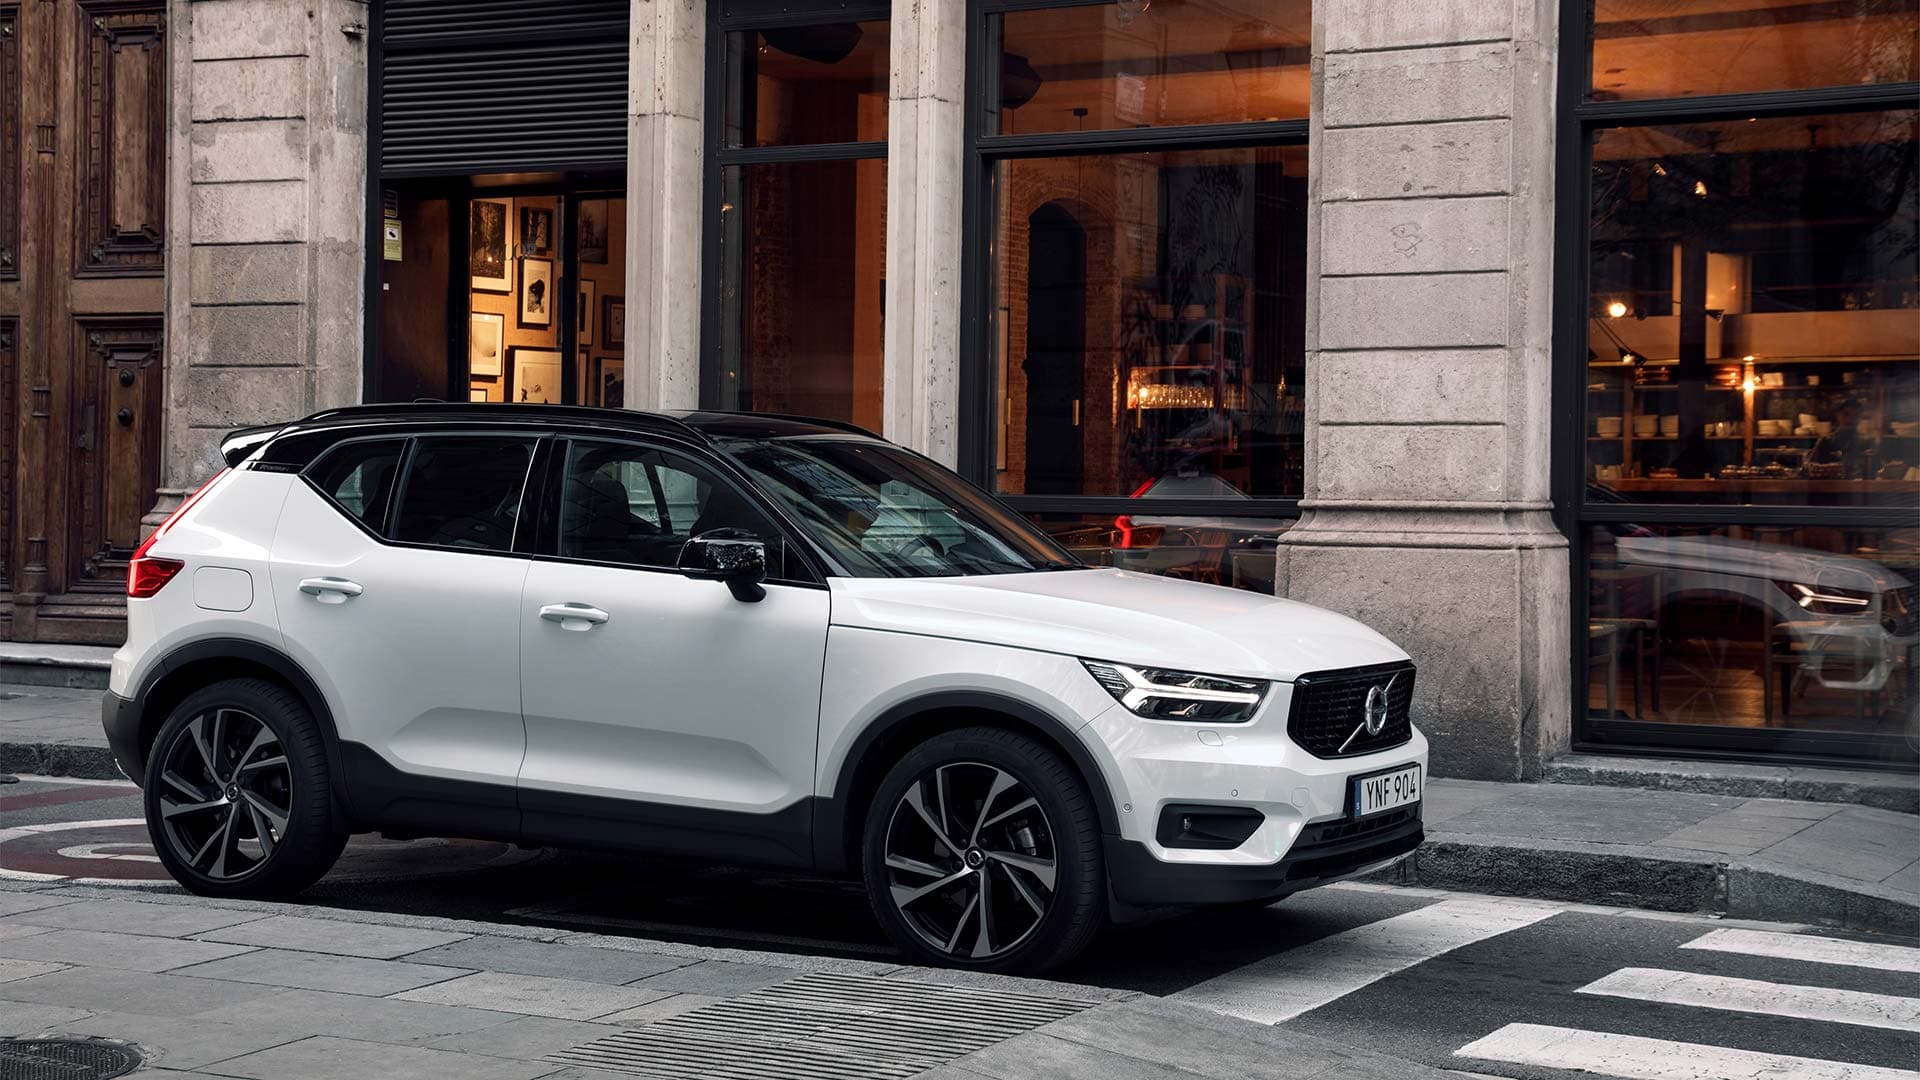 XC40 Will Be First All-Electric Volvo, Executive Says